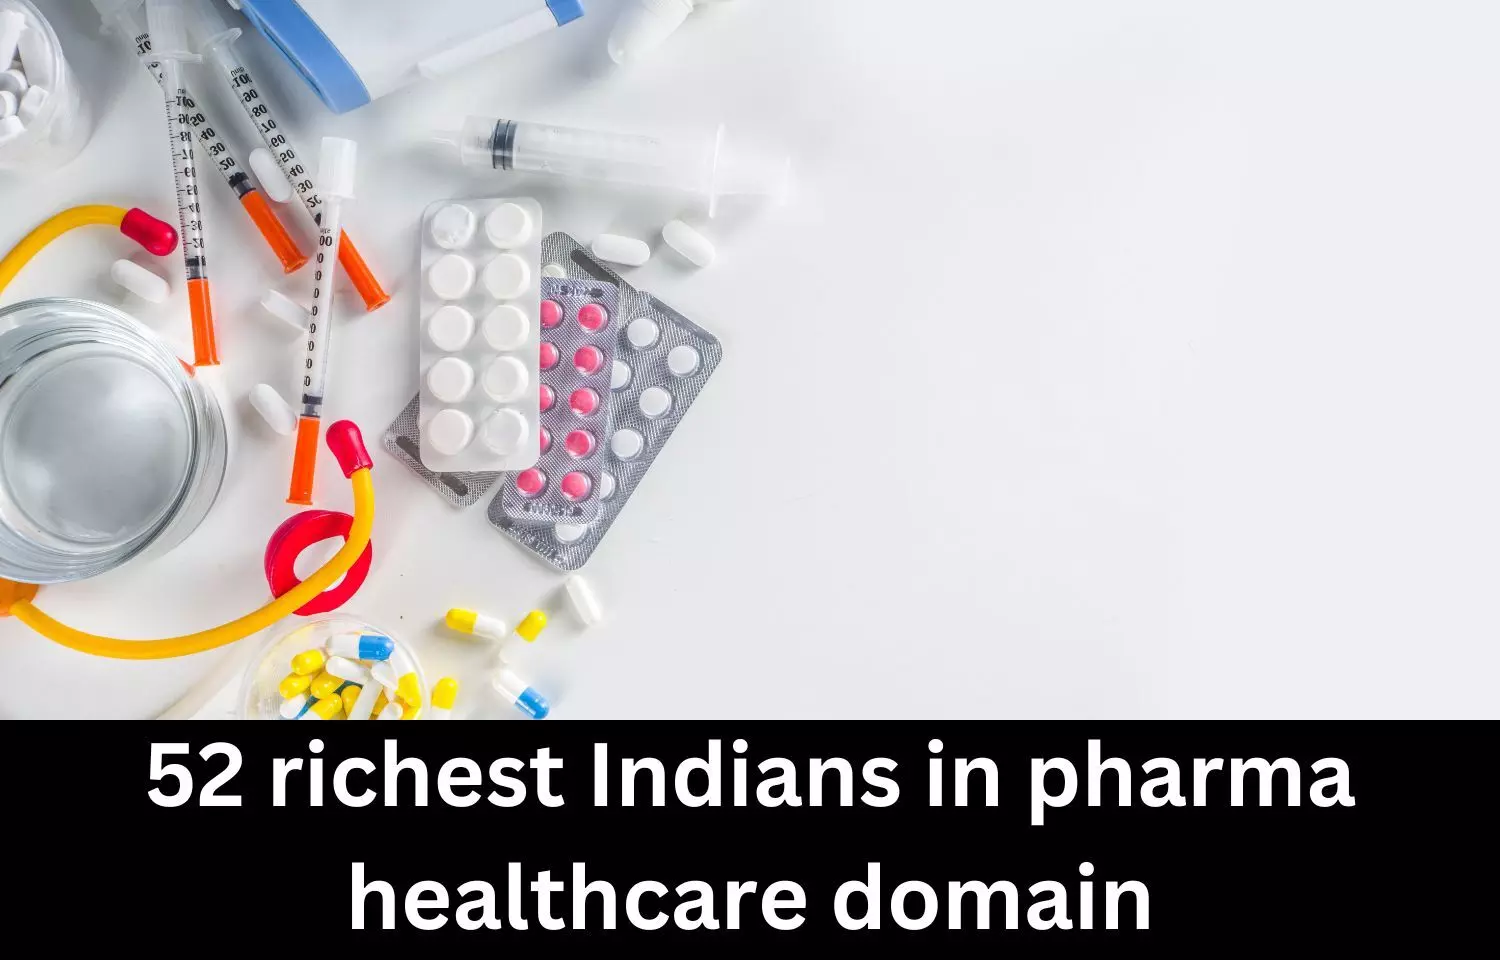 52 richest Indians in pharma healthcare domain